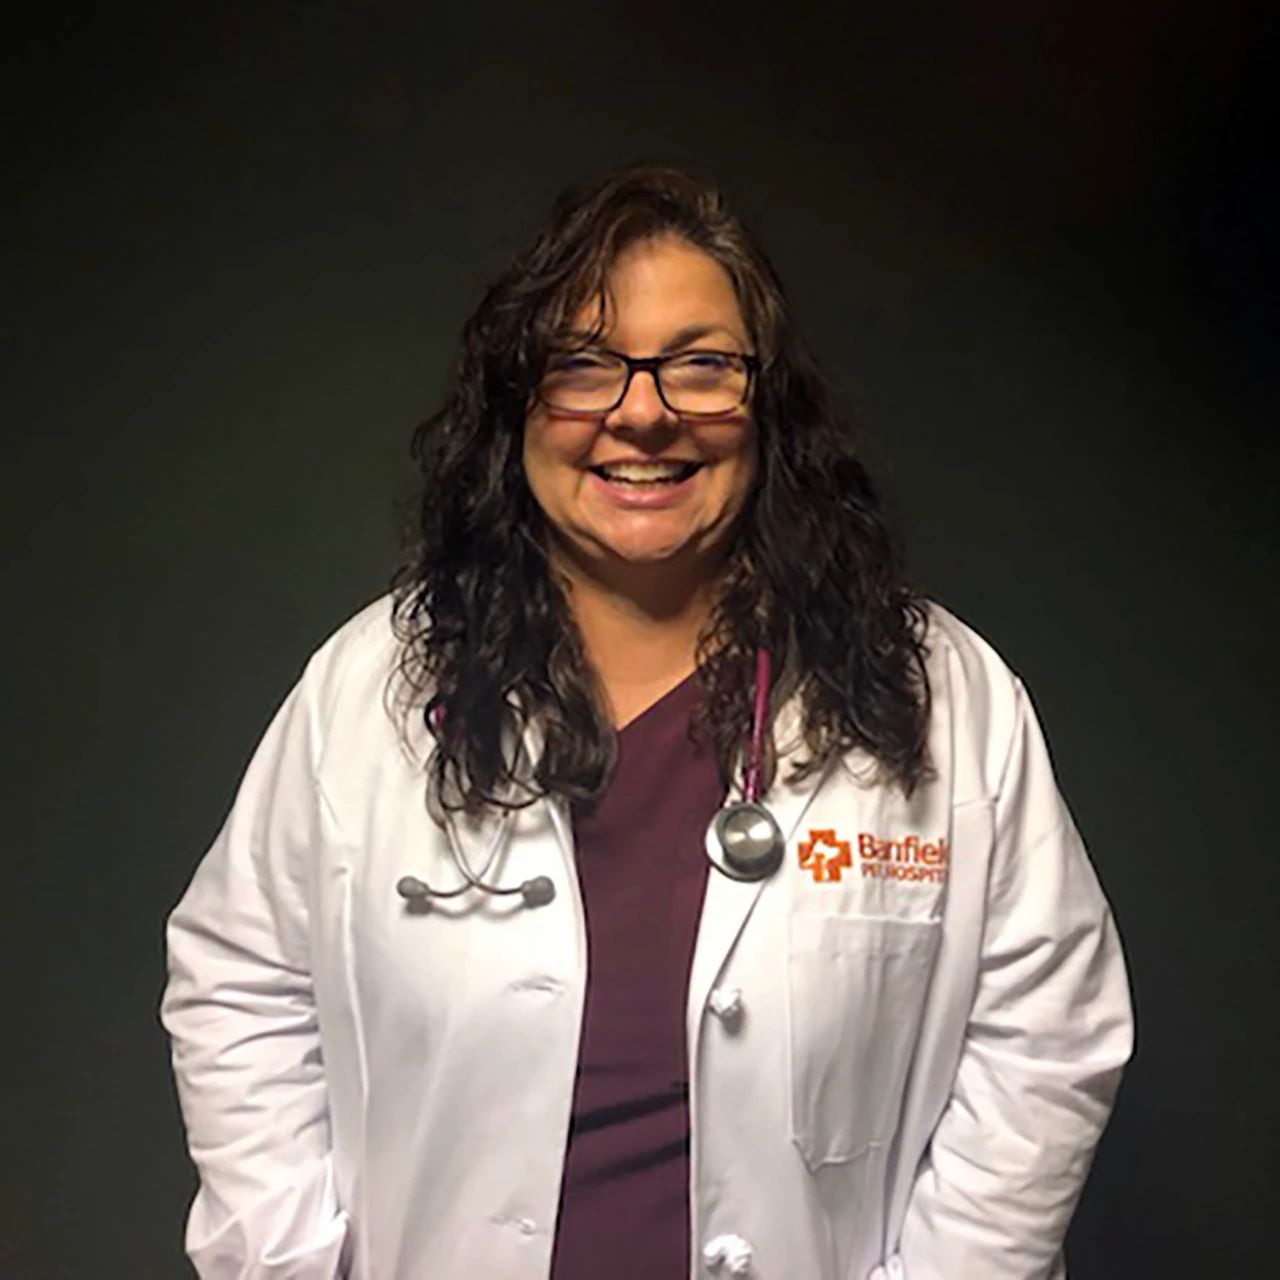 Profile picture of Amy Barnes-Young, DVM, Veterinarian